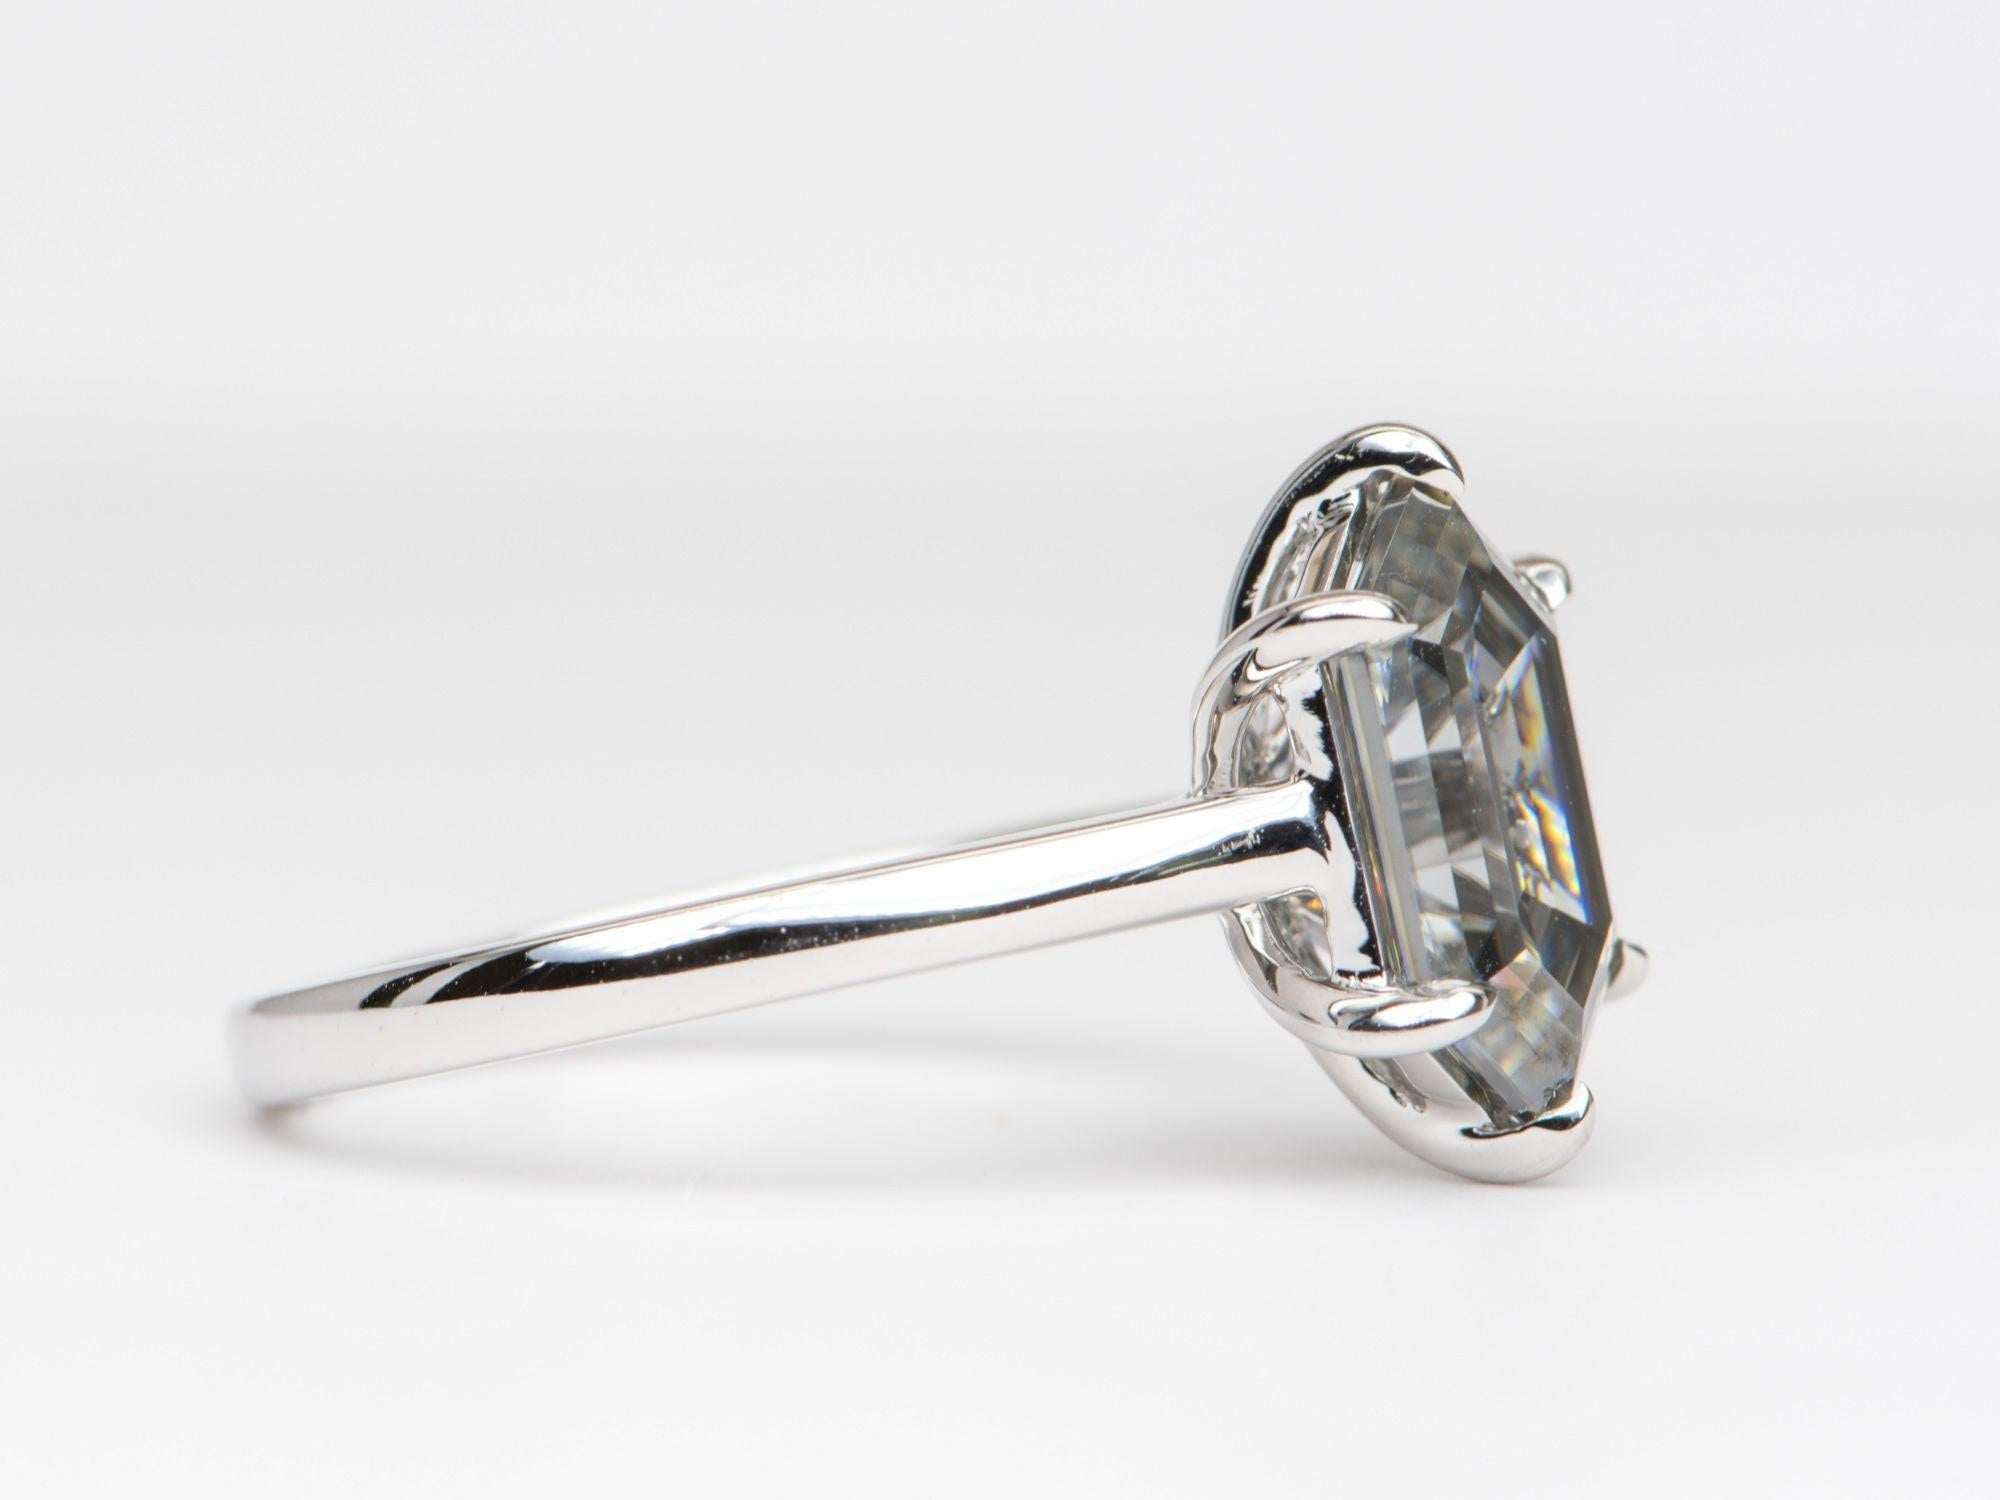 â™¥ This is a stunning ring, featuring a large hexagon moissanite that reflects shades of gray 
â™¥ The setting measures 13.7mm in length, 8.6mm in width, and stands 6.9mm tall from the finger
â™¥ Six claw prongs secure the elongated hexagon